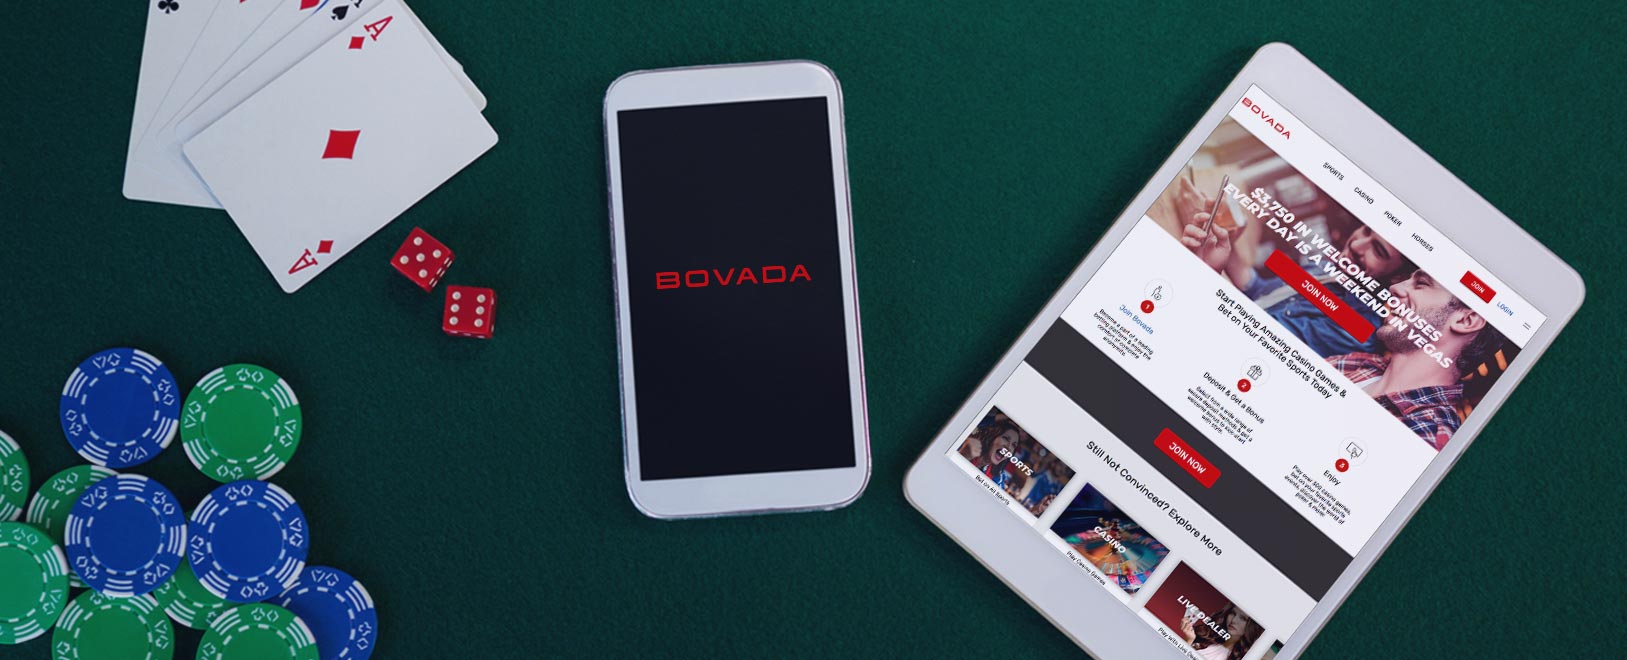 Bovada mobile live betting bovada strony csgo betting website